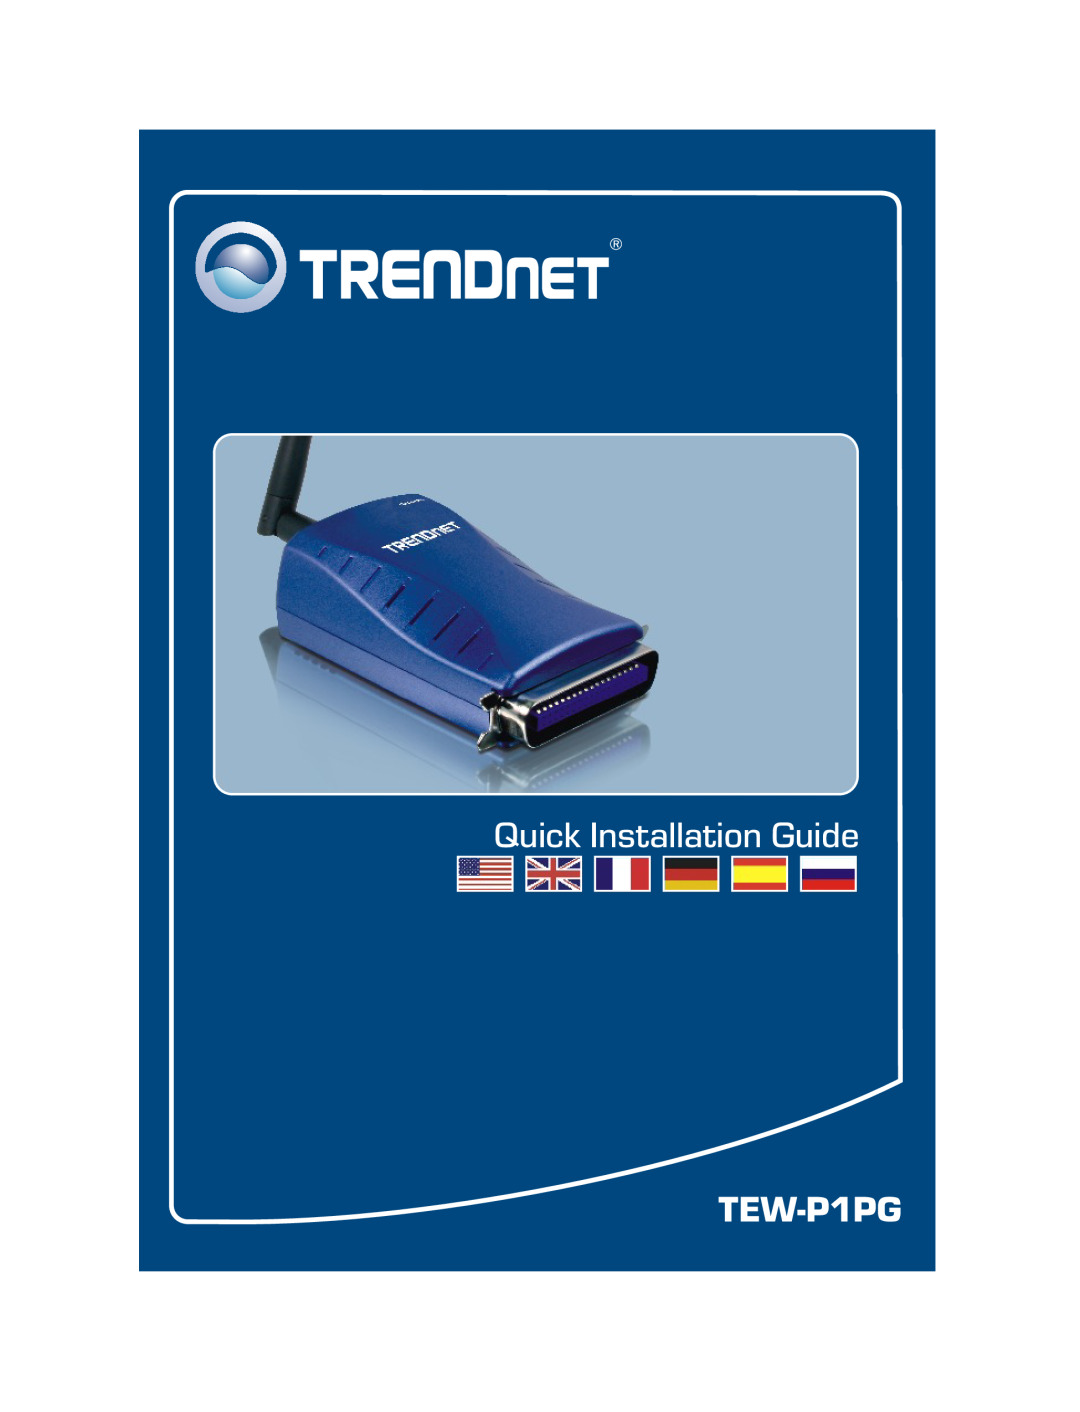 TRENDnet TEW-P1PG manual Table Of Contents, About This Guide, Introduction, Hardware Installation, Using The Utilities 